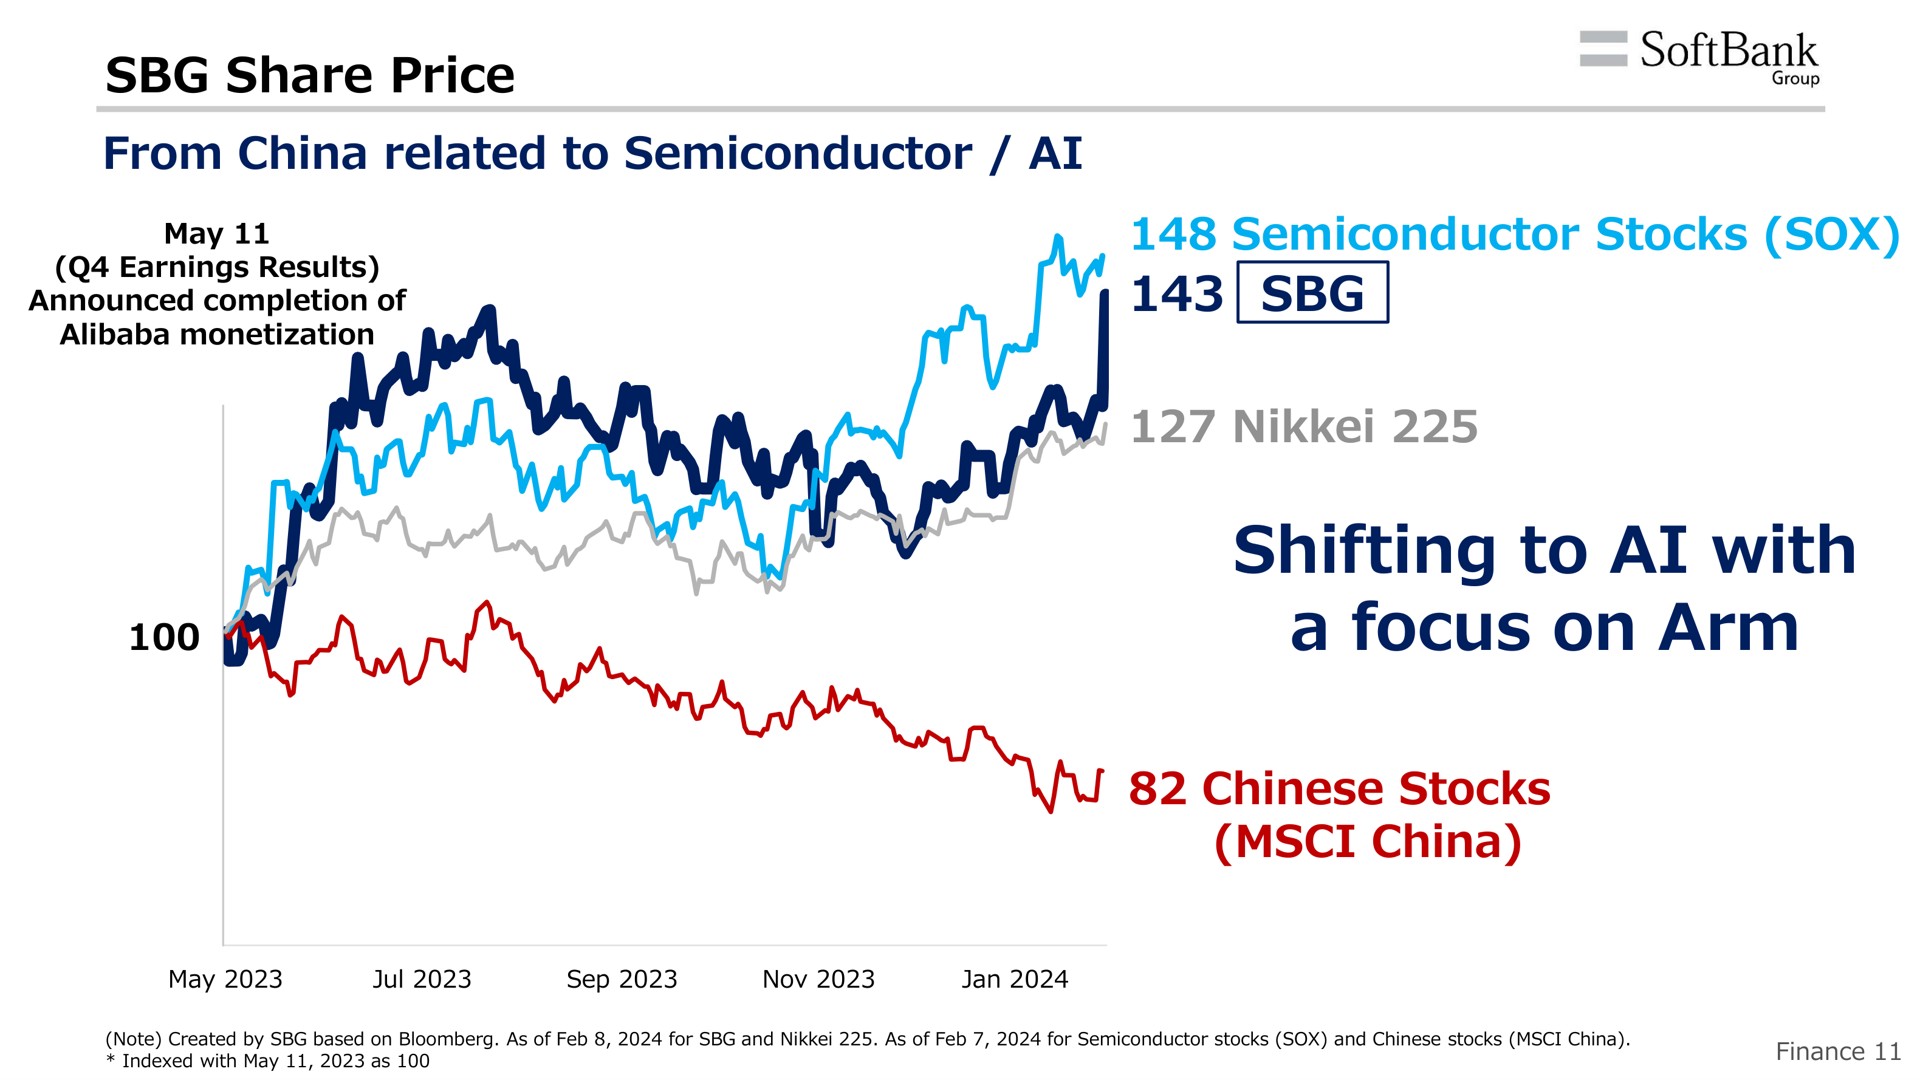 share price from china related to semiconductor semiconductor stocks shifting to with a focus on arm stocks china | SoftBank